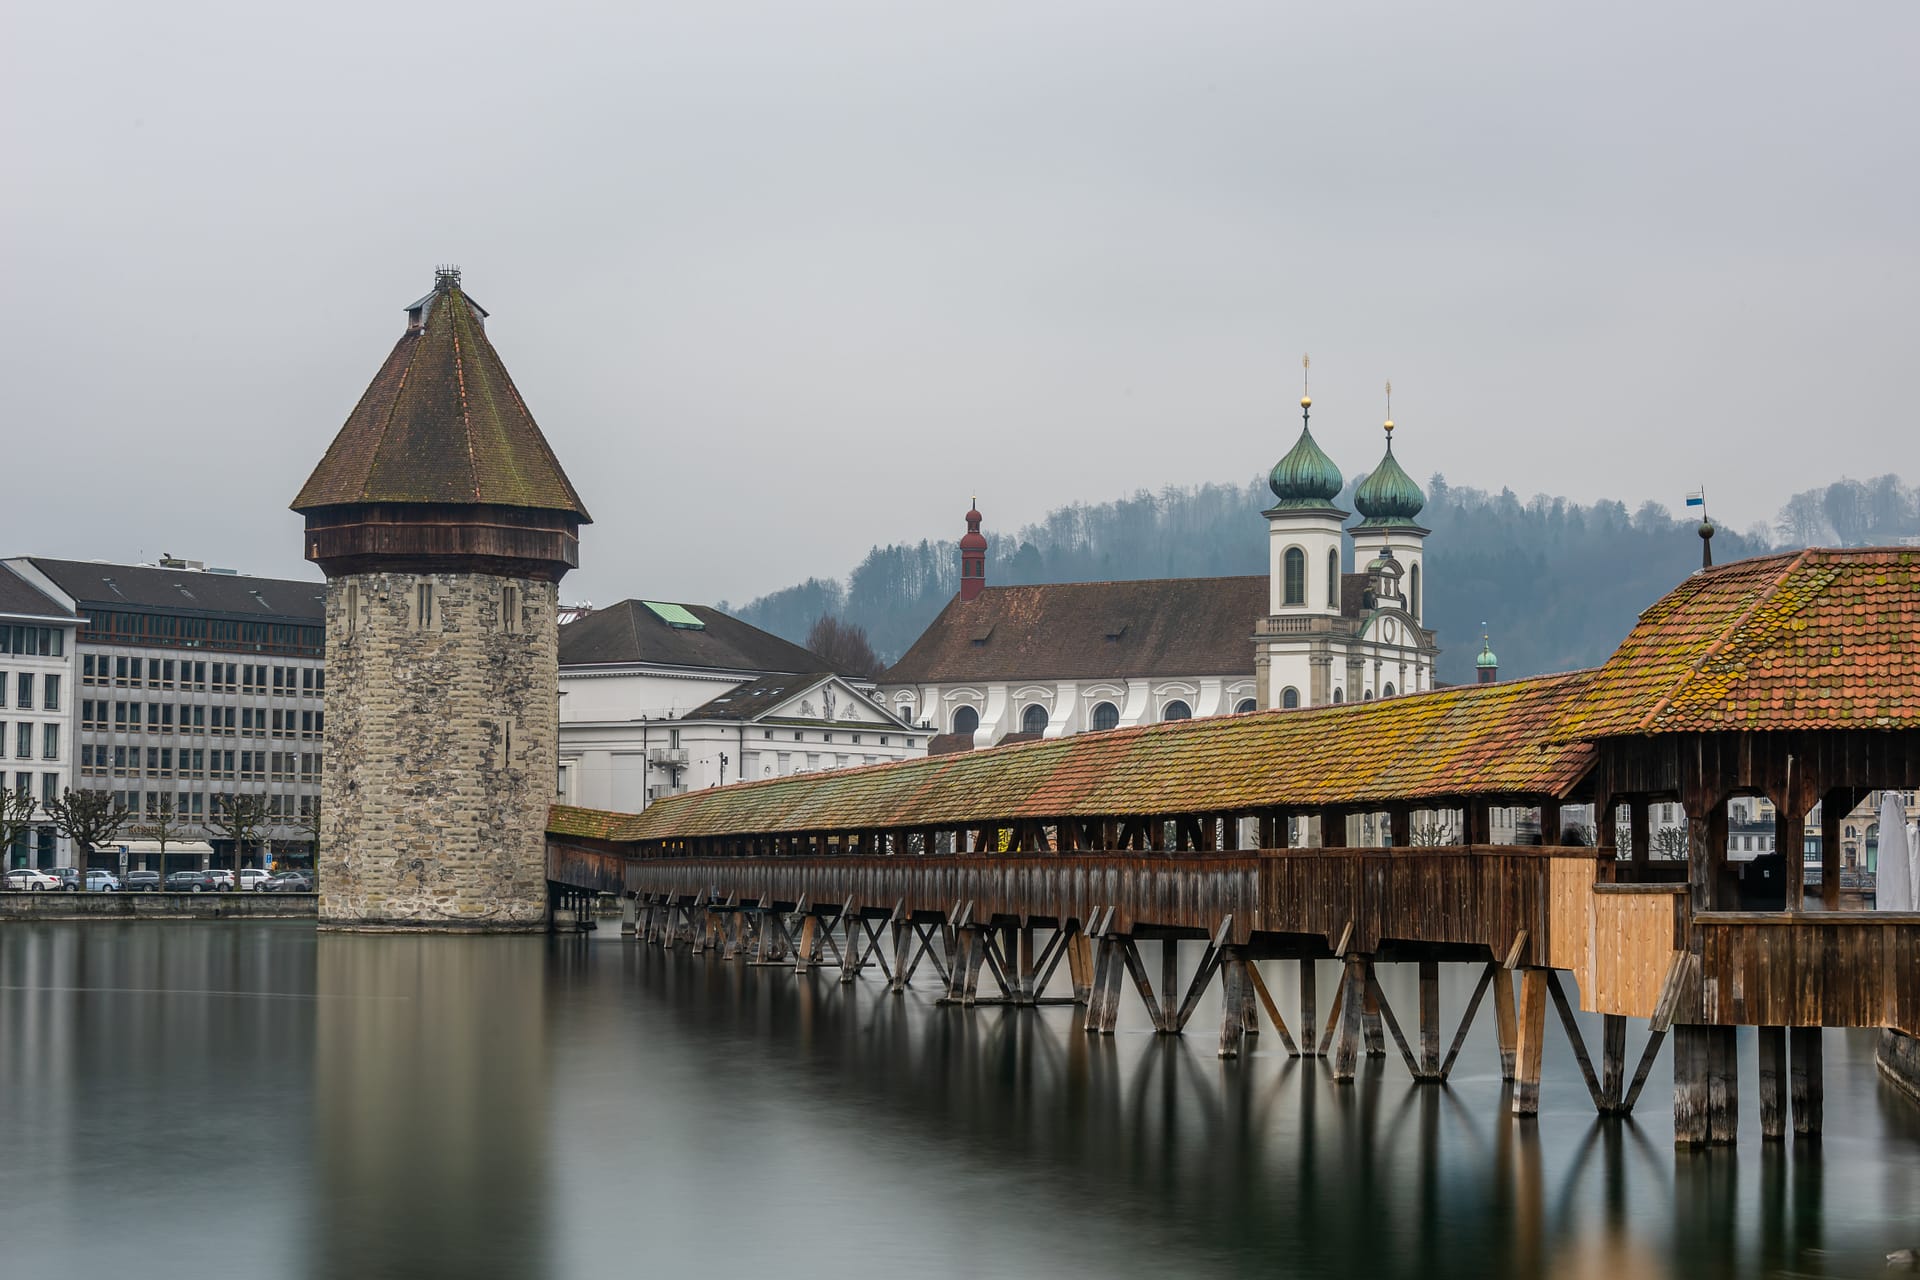 lucerne-jesuit-church-surrounded-by-water-cloudy-sky-lucerne-switzerland